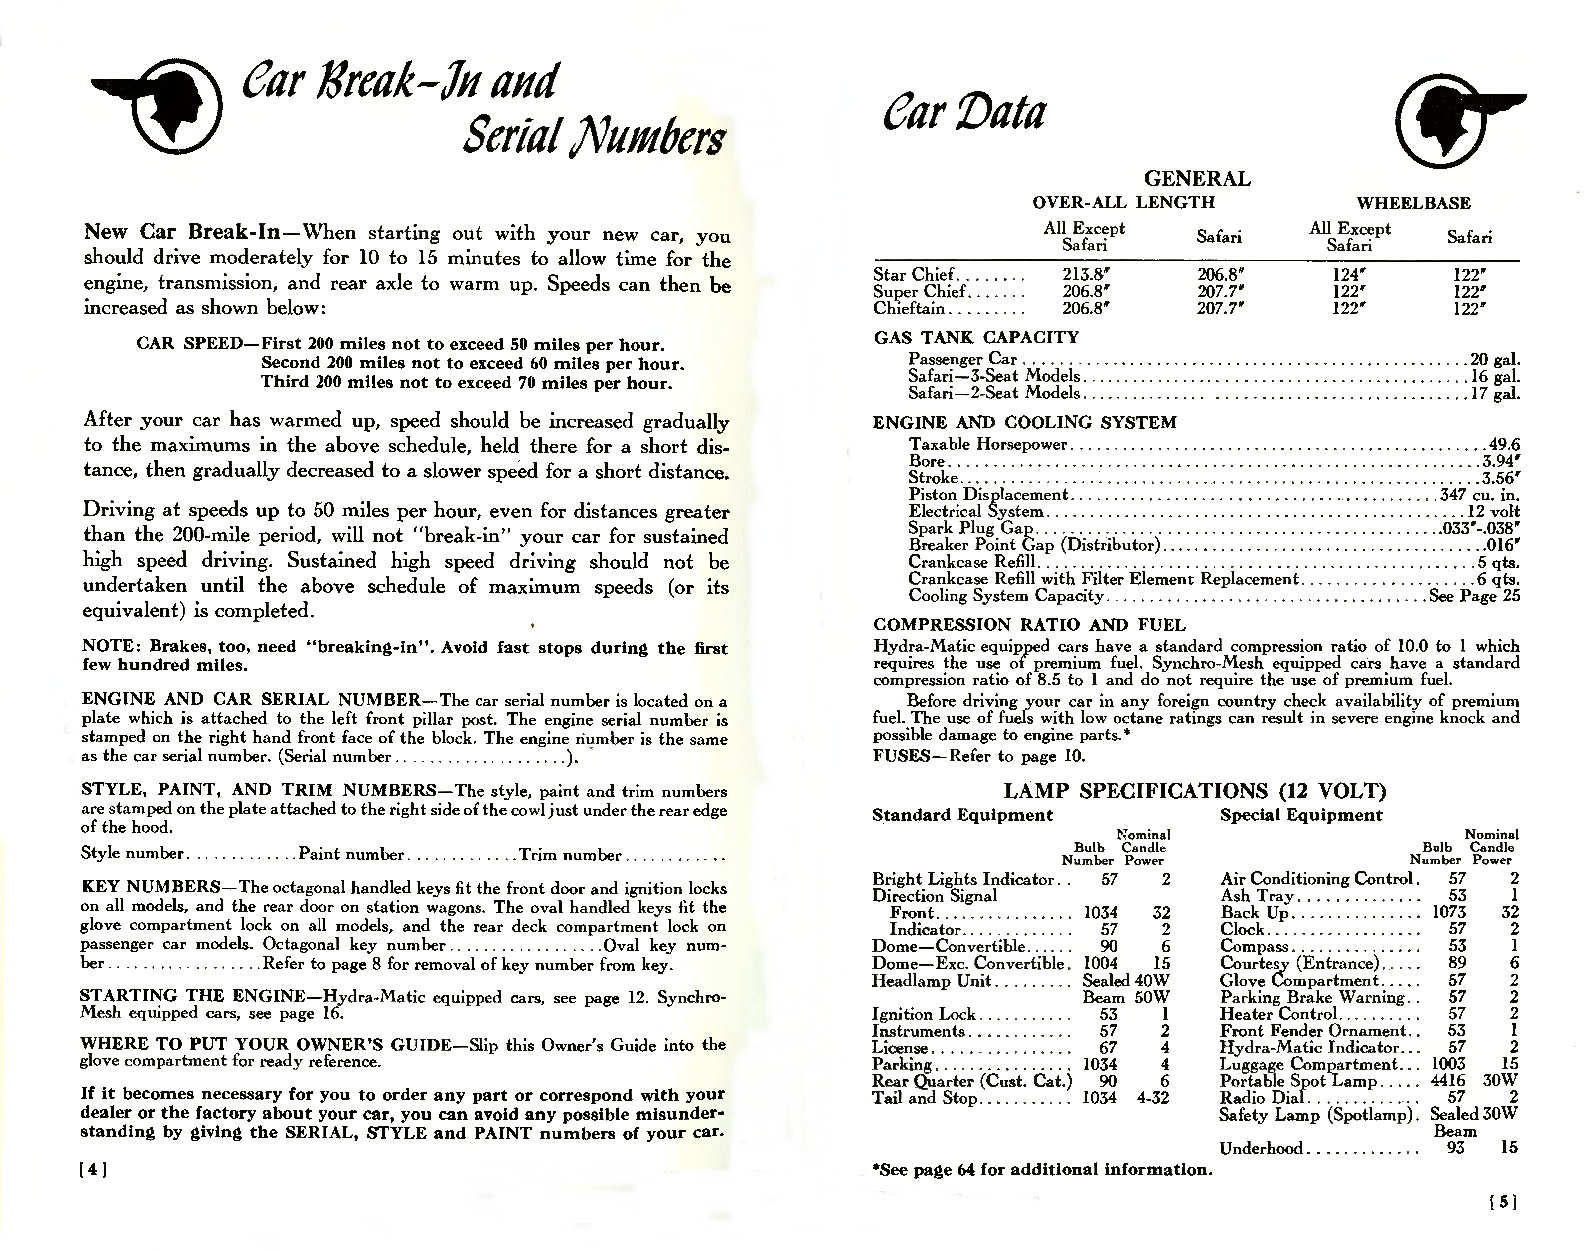 1957_Pontiac_Owners_Guide-04-05